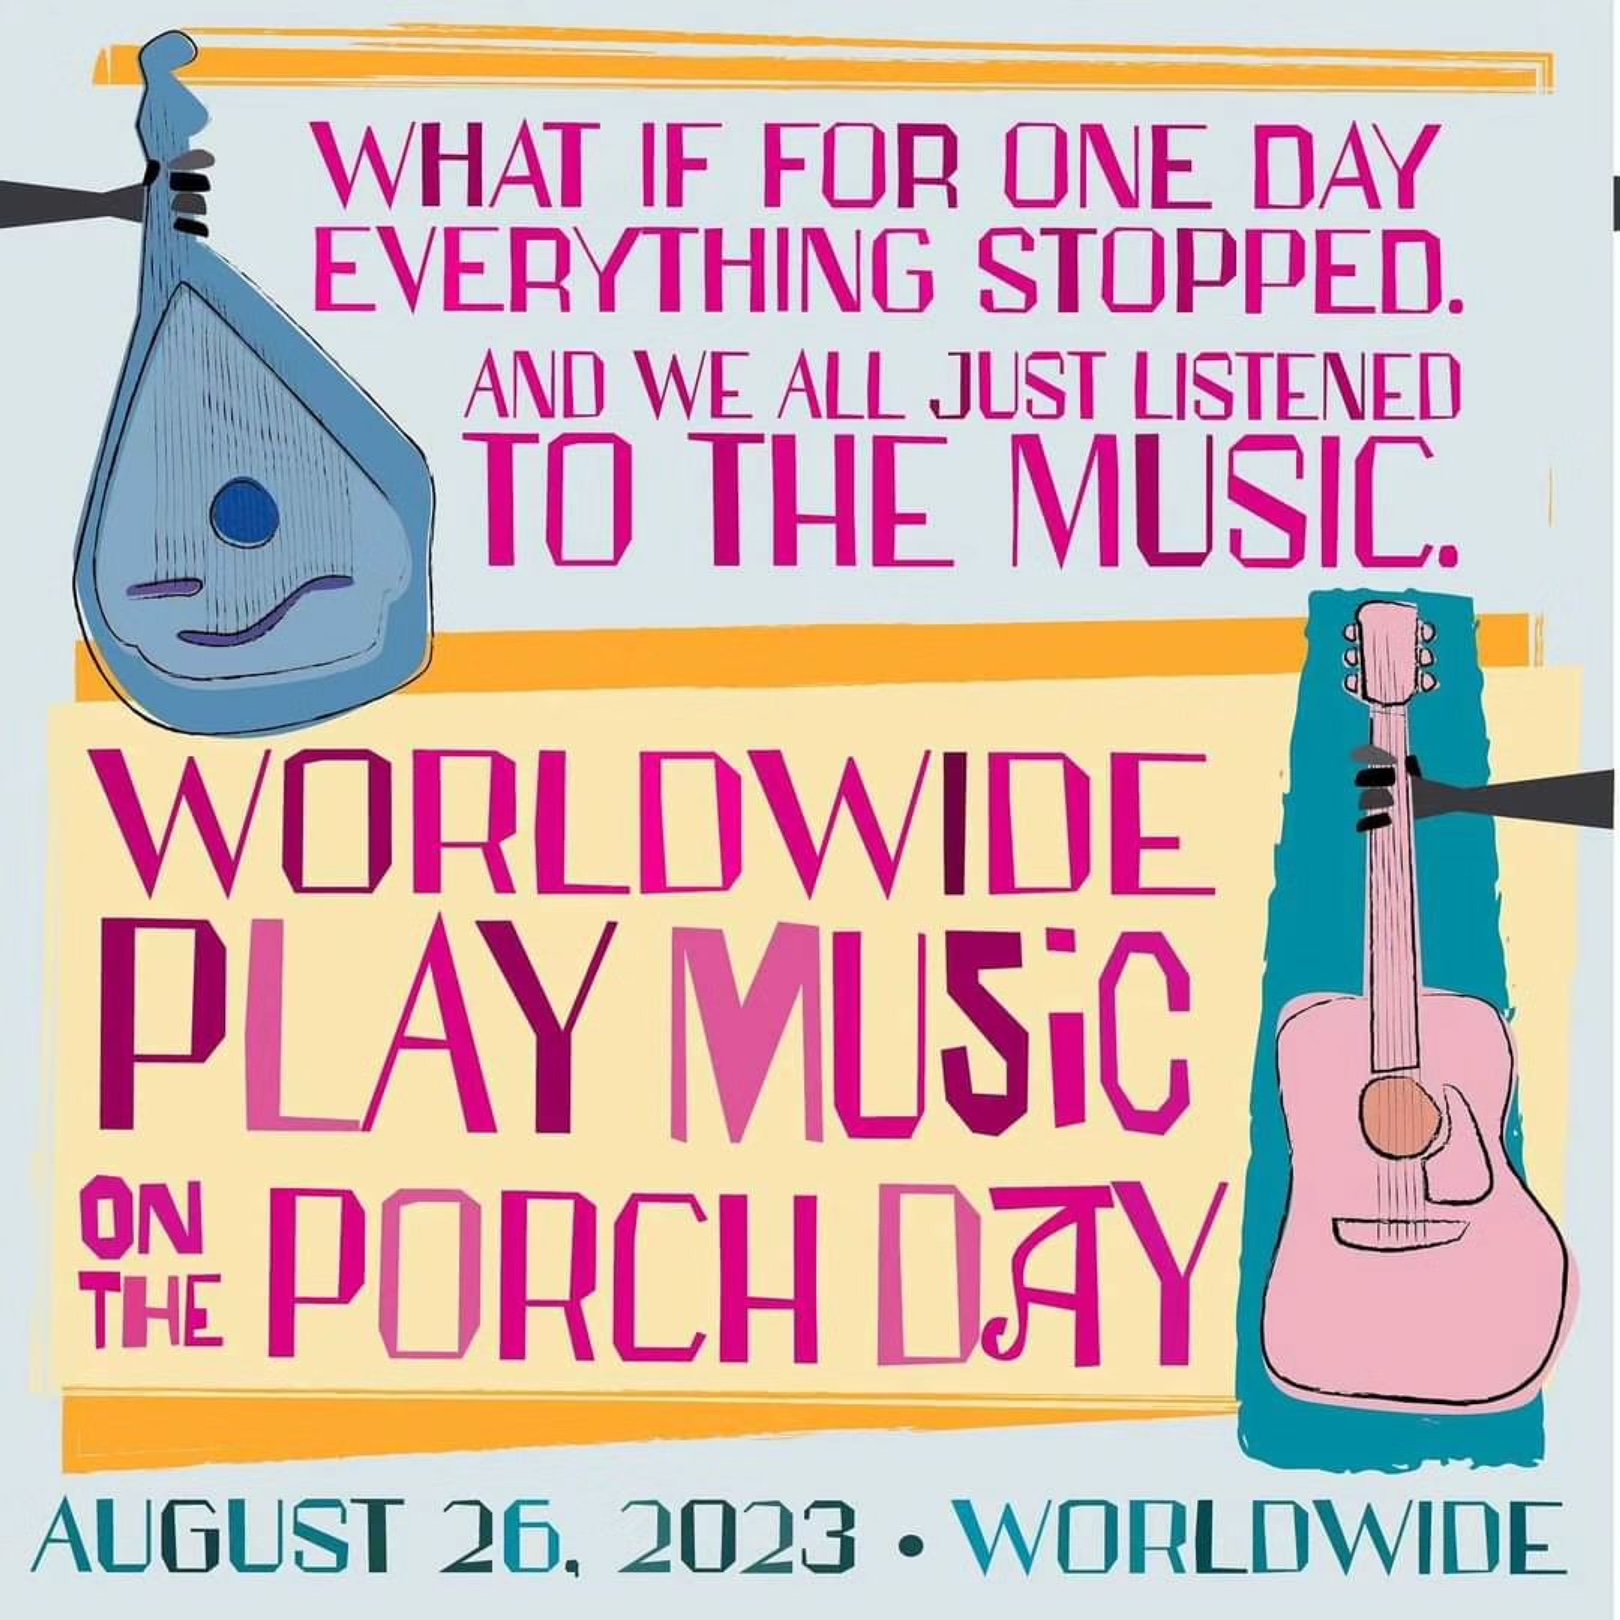 Calling All Local Musicians! Aug 26th is Worldwide Play Music On The Porch Day